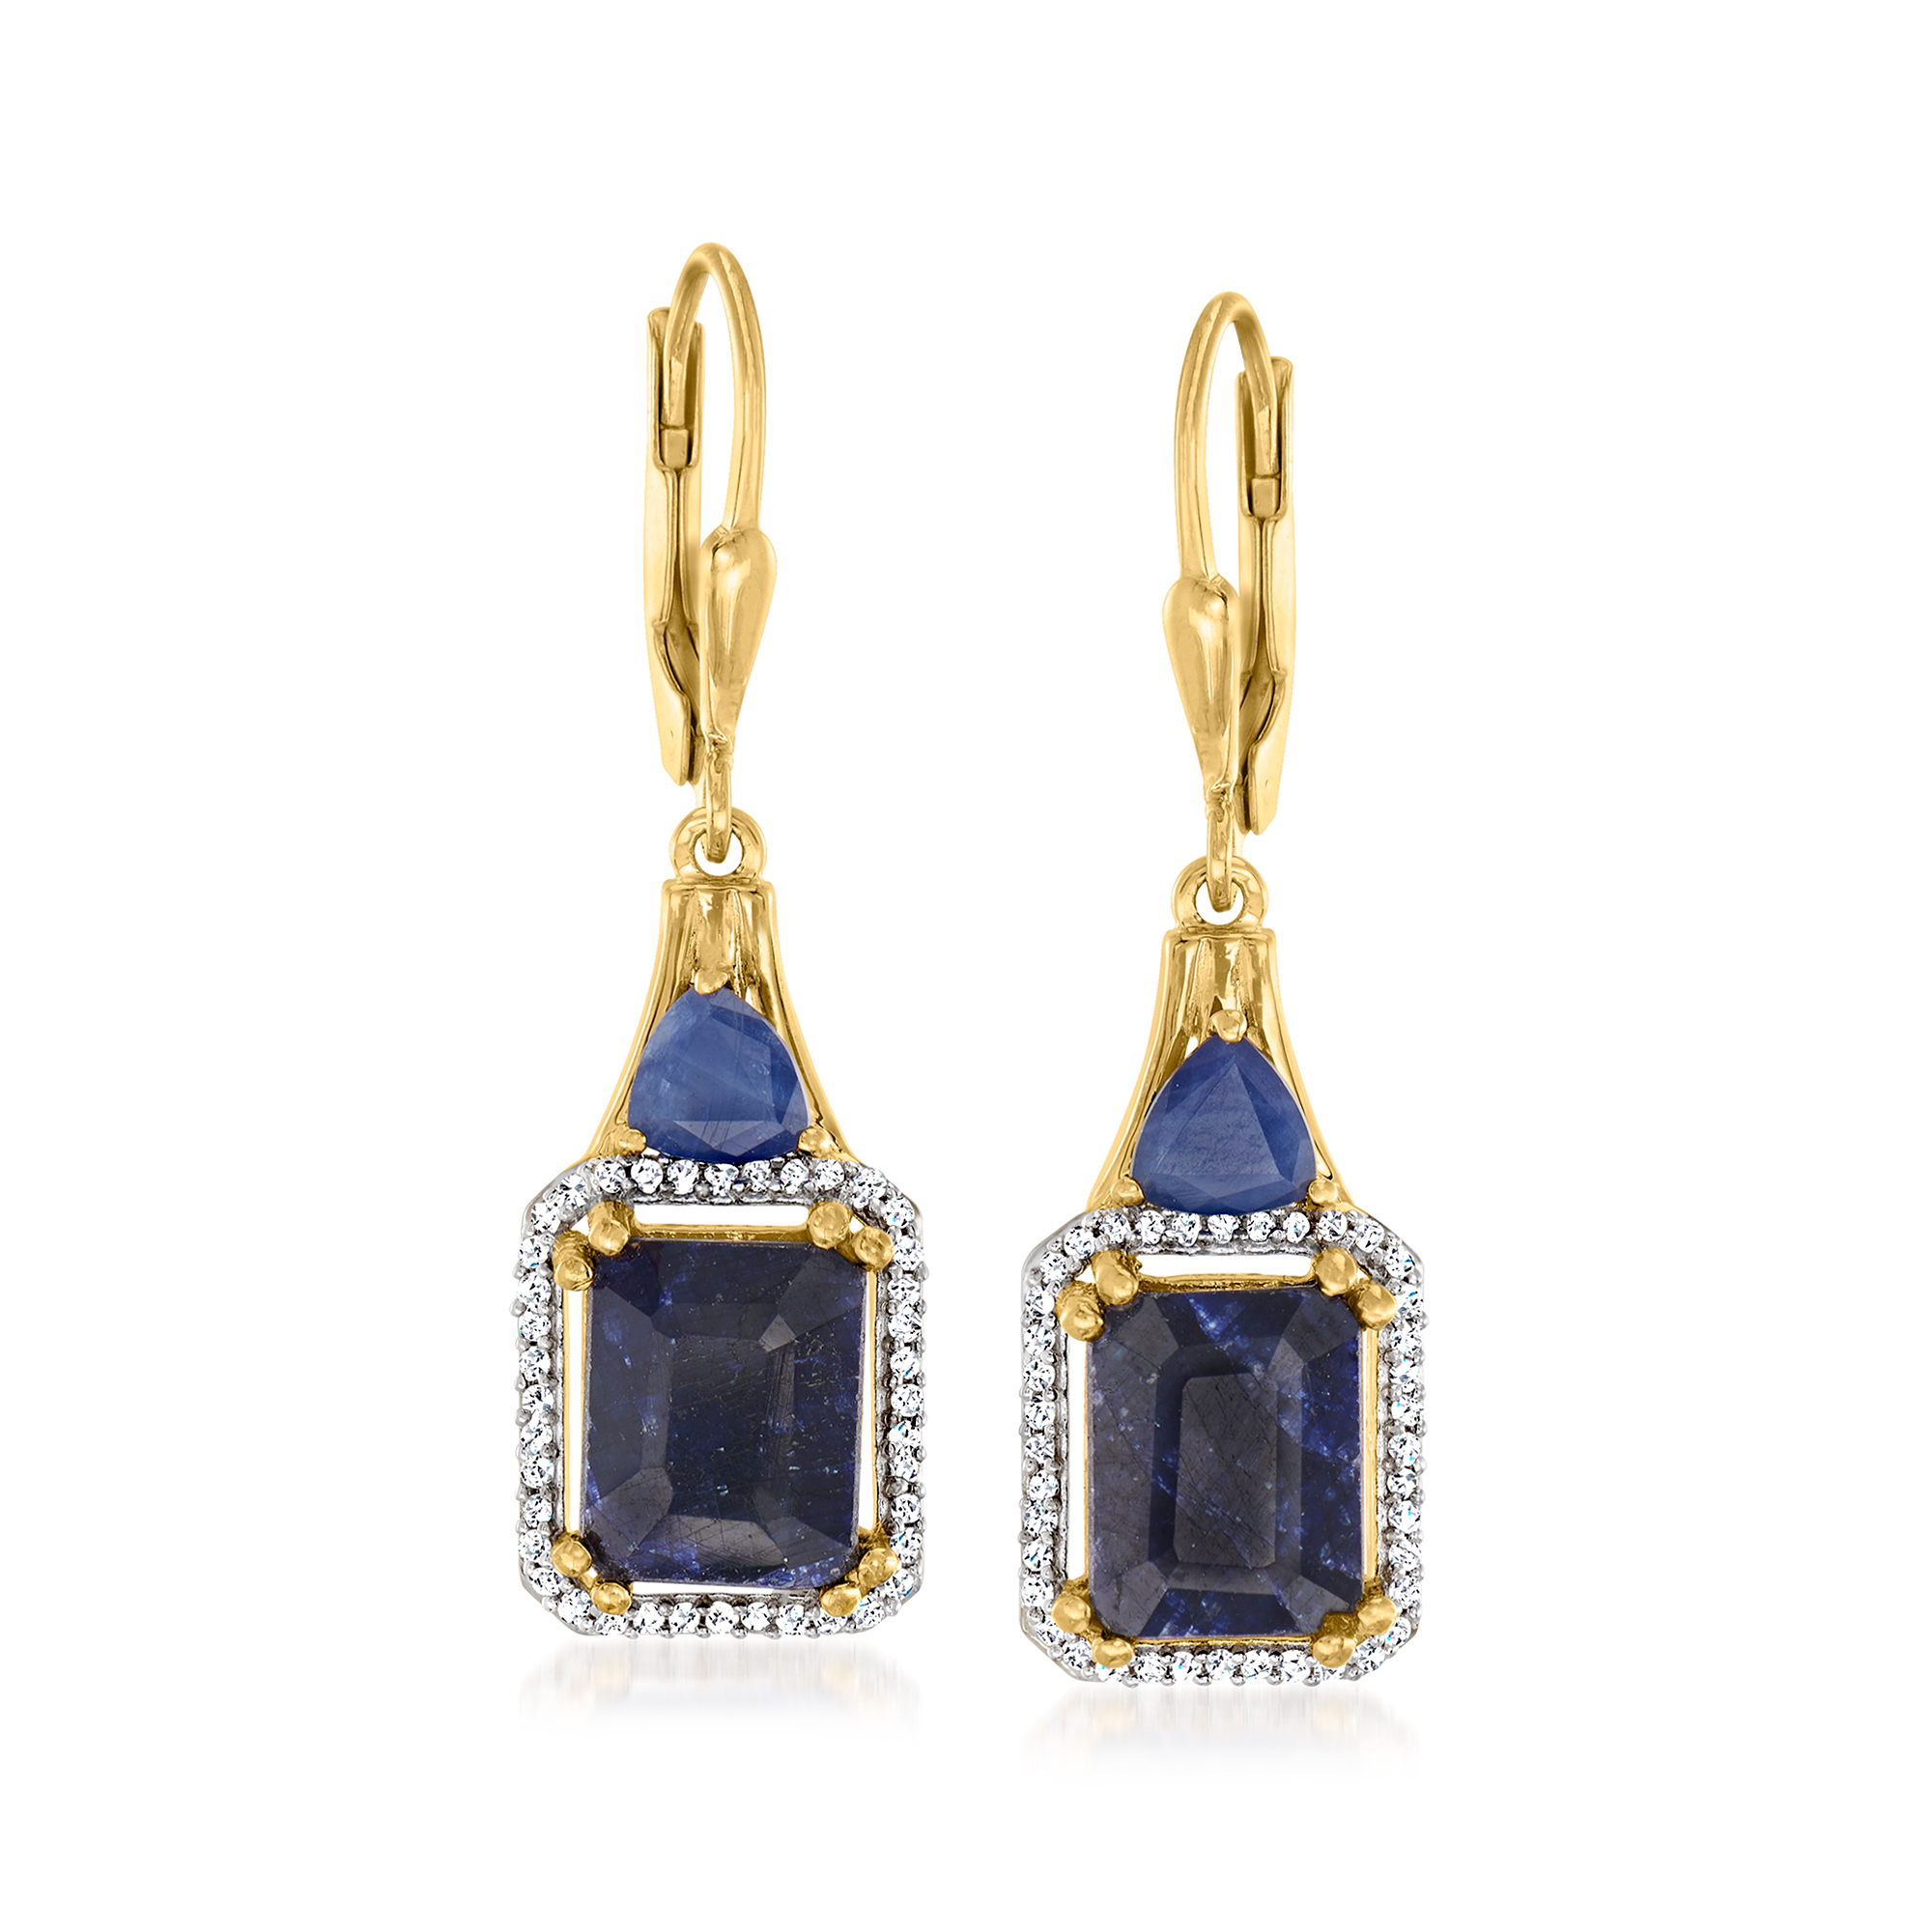 7.00 ct. Sapphire and .21 ct. Diamond Drop Earrings in 18kt Gold  Over Sterling Ross-Simons